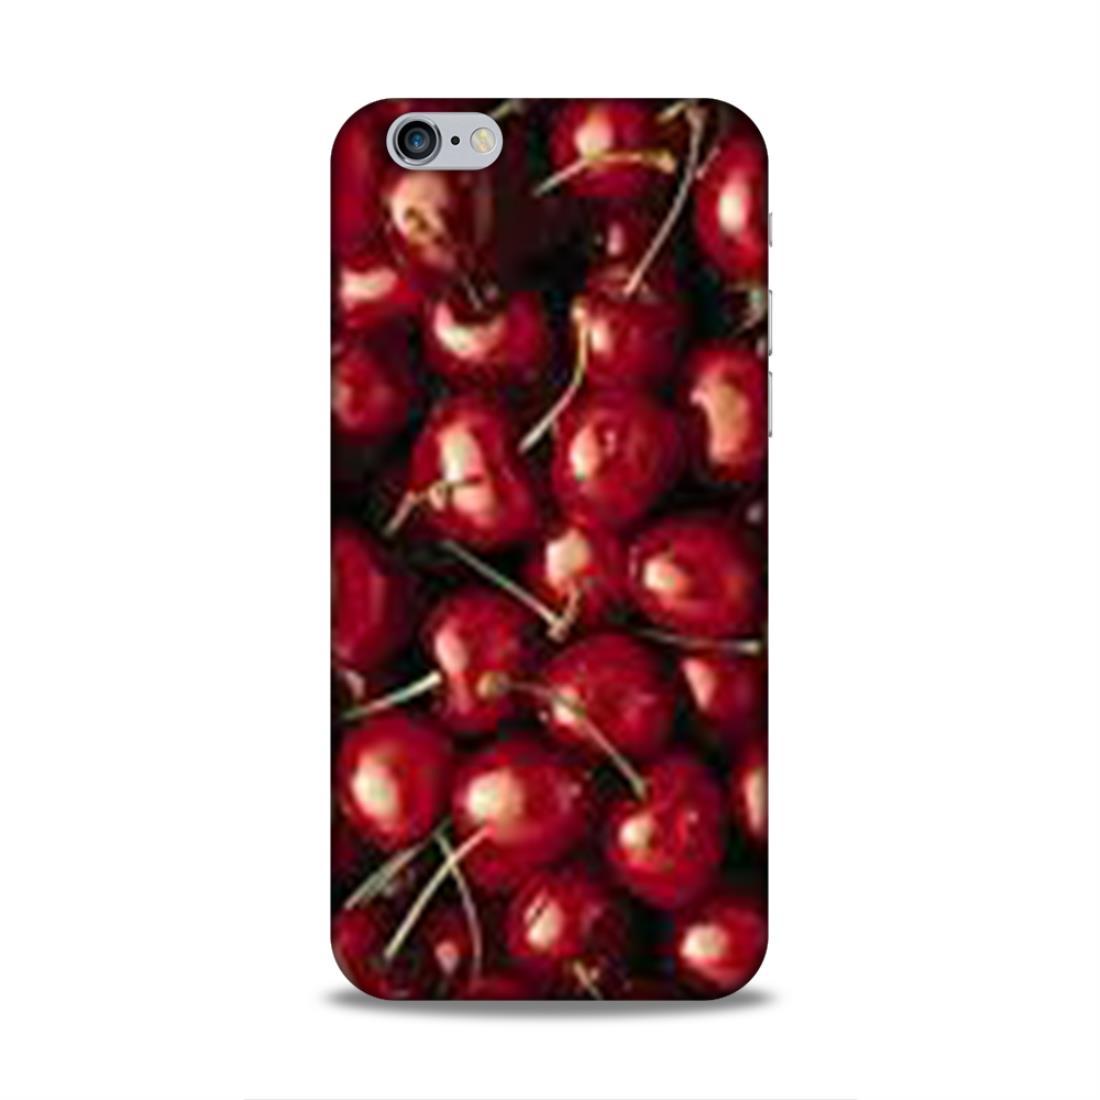 Red Cherry Love iPhone 6 Mobile Cover Case